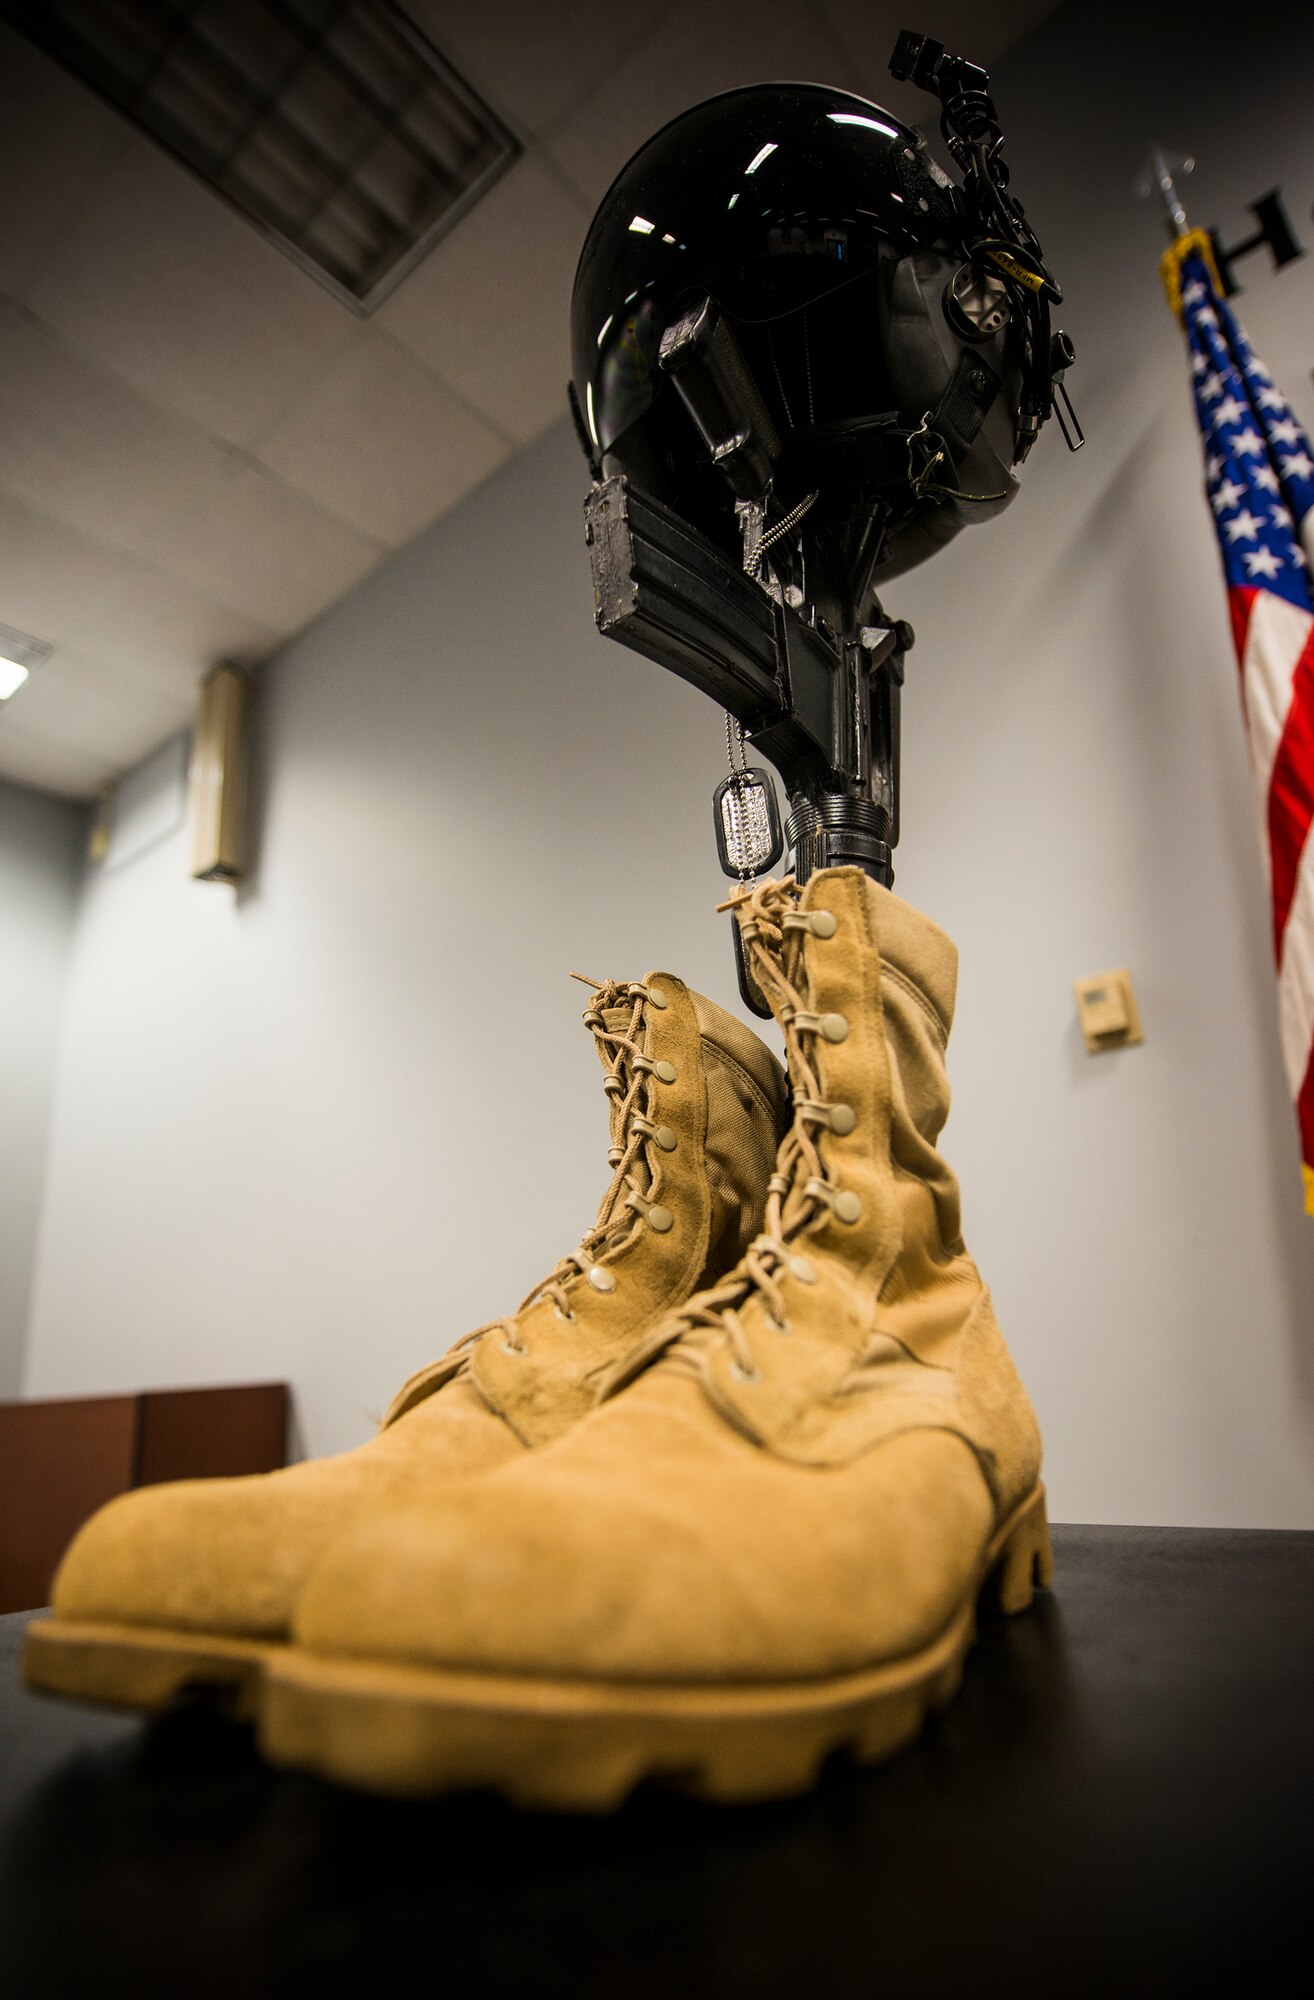 A traditional display of boots, dog tags, M-16 rifle and kevlar helmet is set up as a memorial during a Khobar Towers remembrance ceremony at Moody Air Force Base, Ga., June 25, 2014. The ceremony honored the 19 service members who died during the attack 18 years ago. (U.S. Air Force photo by Senior Airman Douglas Ellis/Released)
